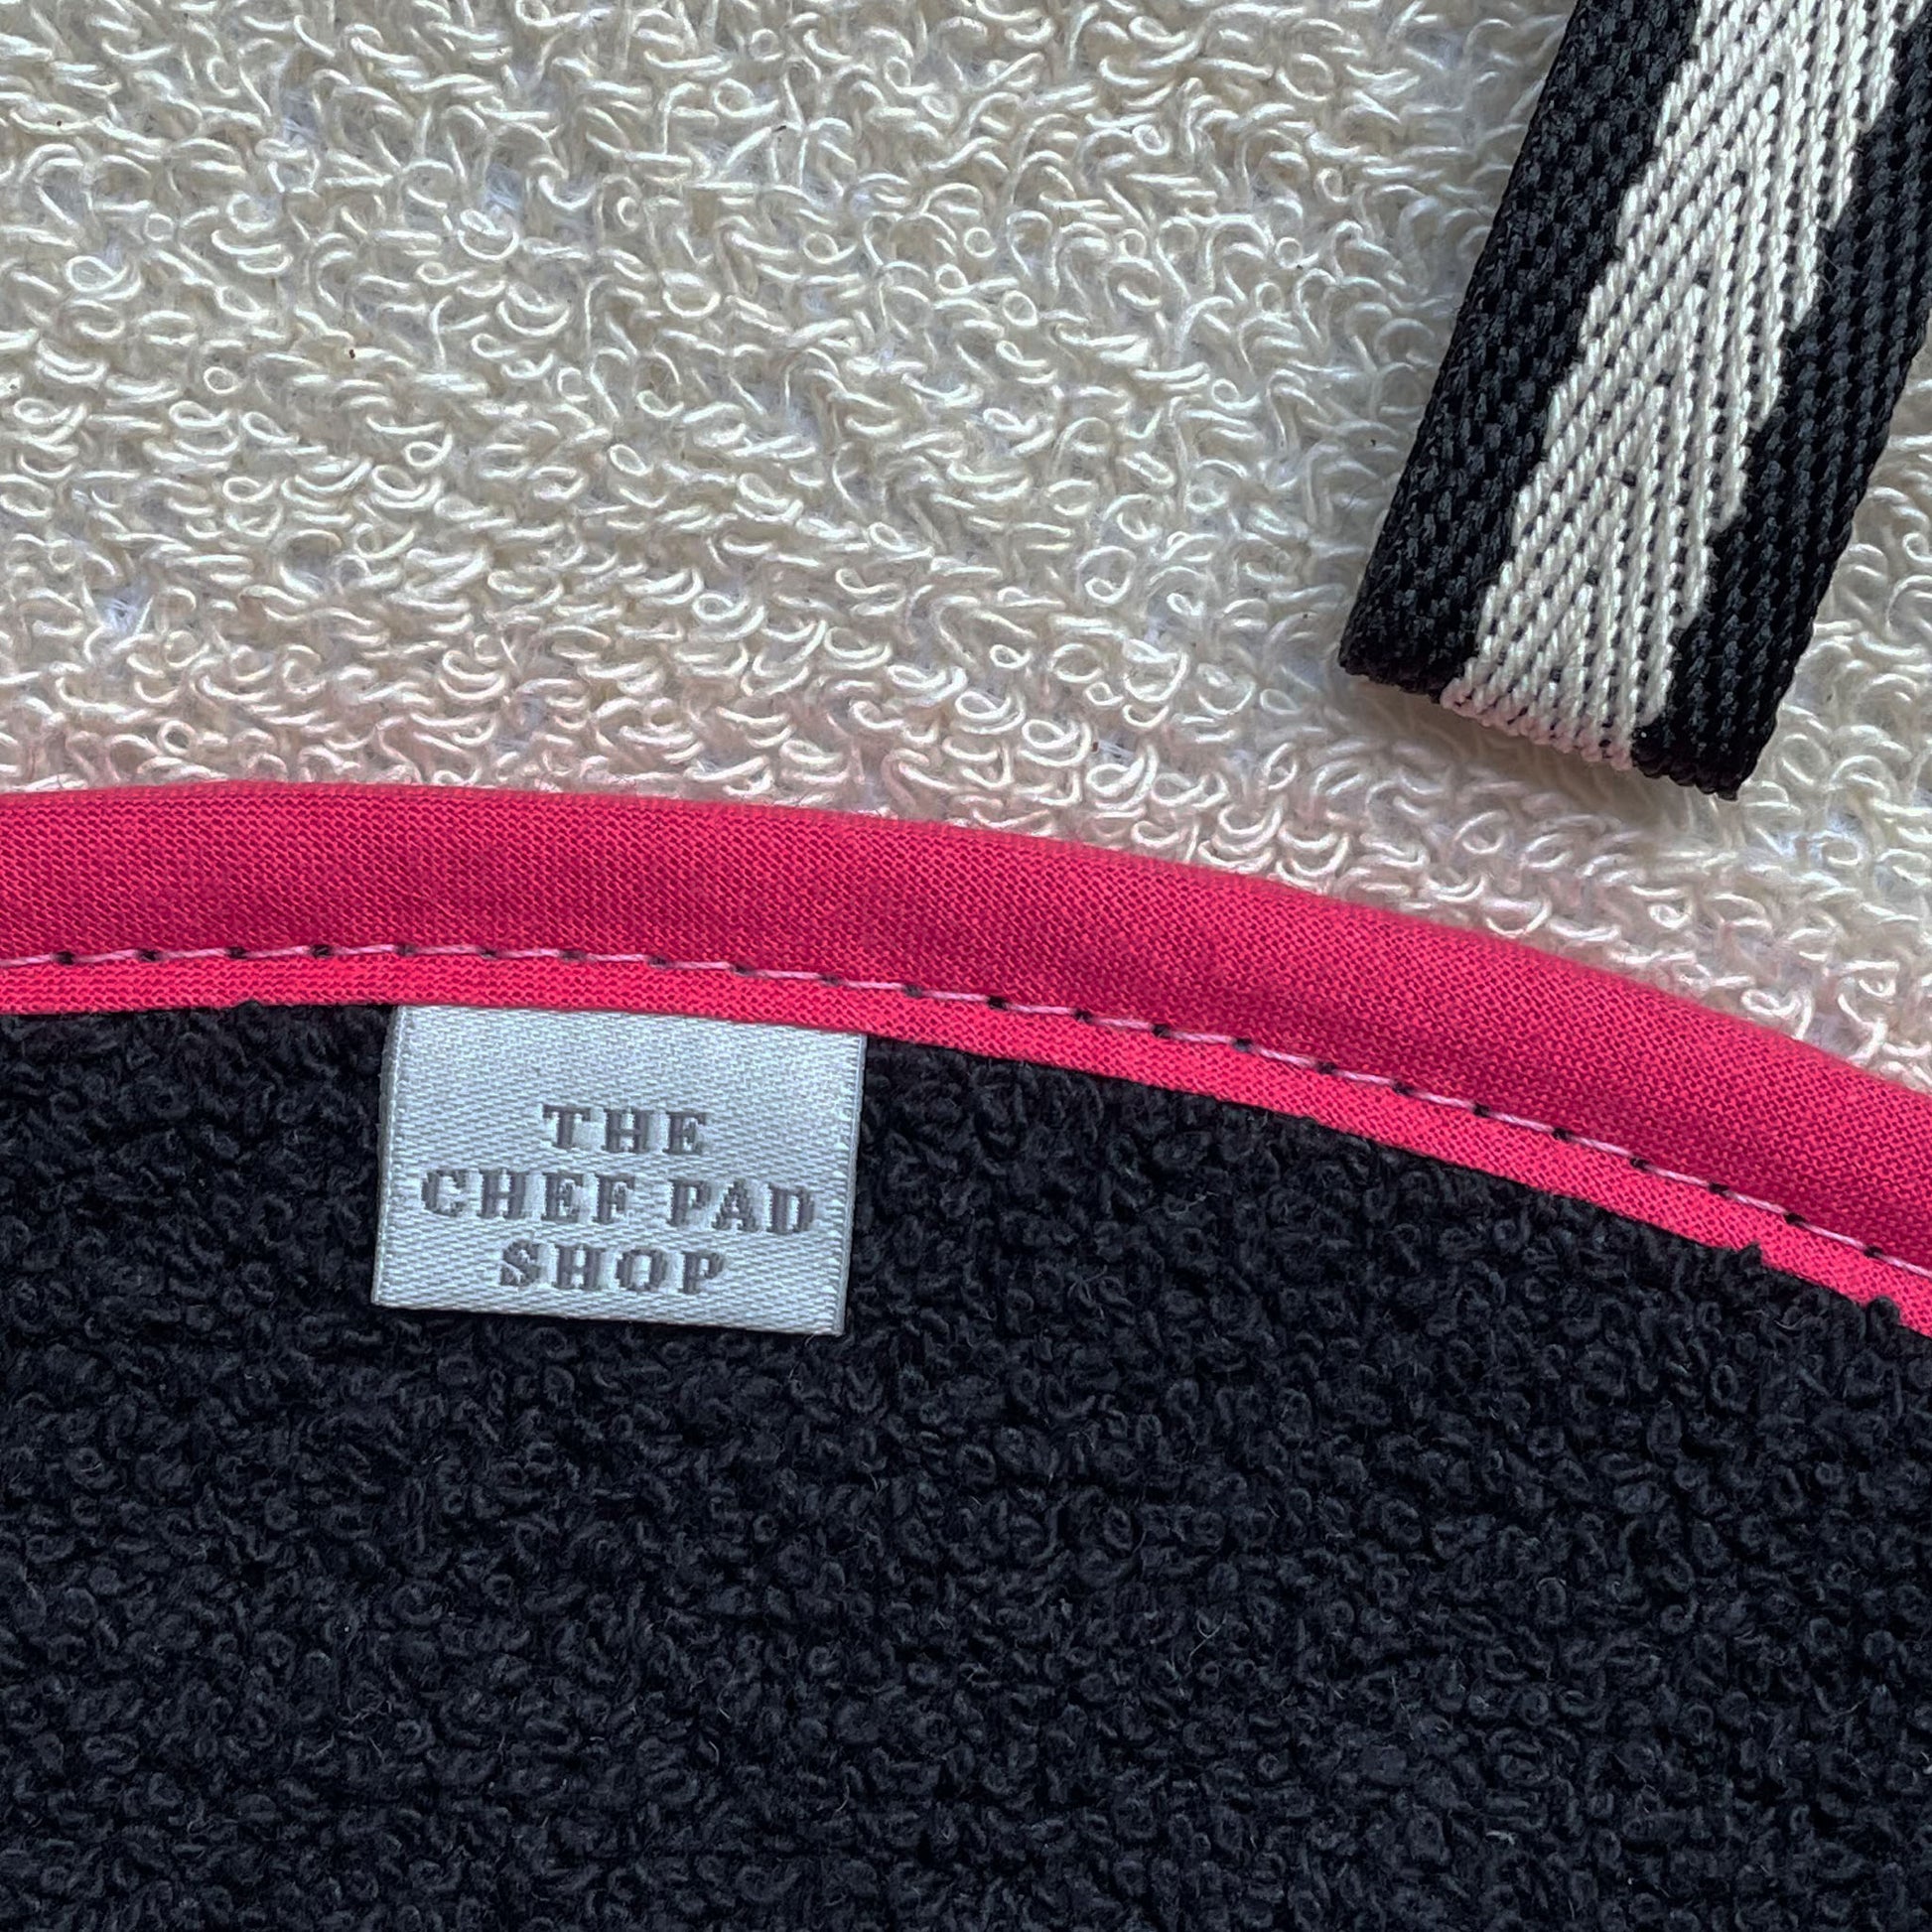 Chef Pad - Aga - The Chef Pad Shop - Insulate Range: Black & Cream Chefs Pad with Pink Binding For Use With Aga Cookers